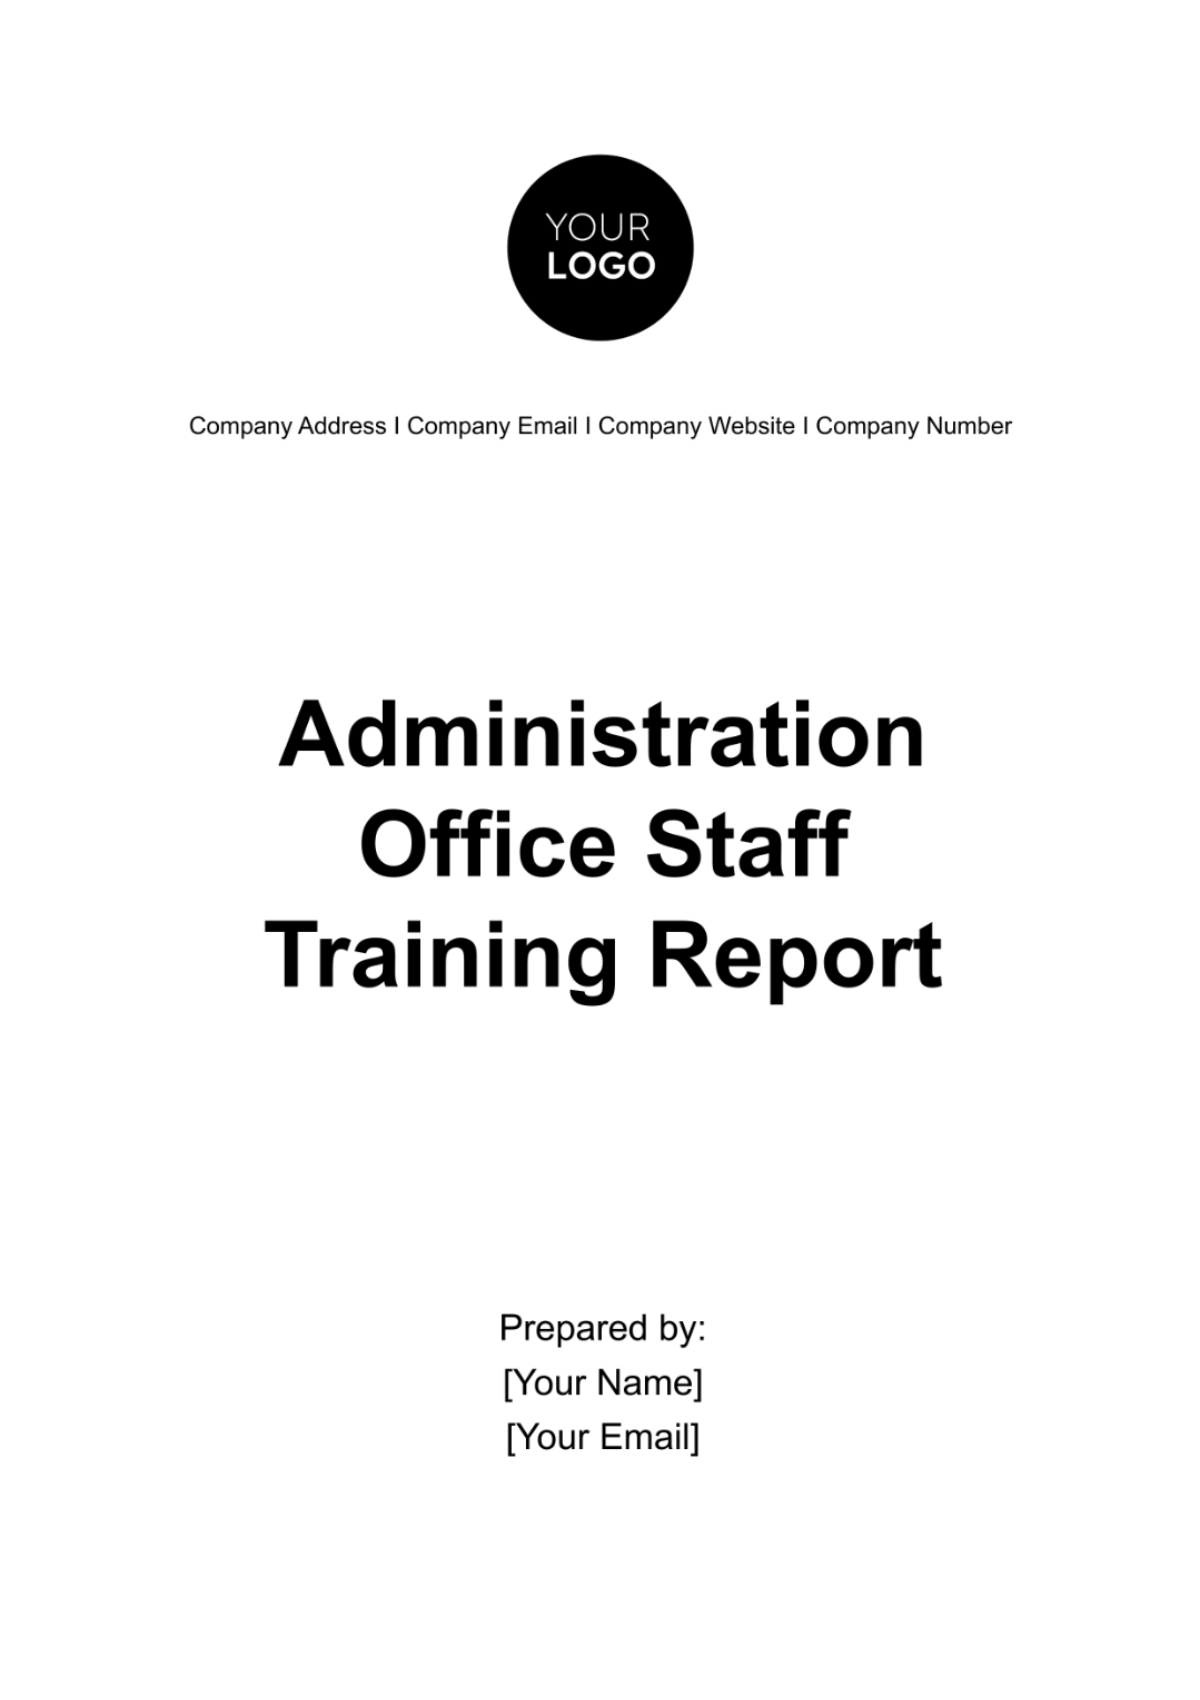 Administration Office Staff Training Report Template